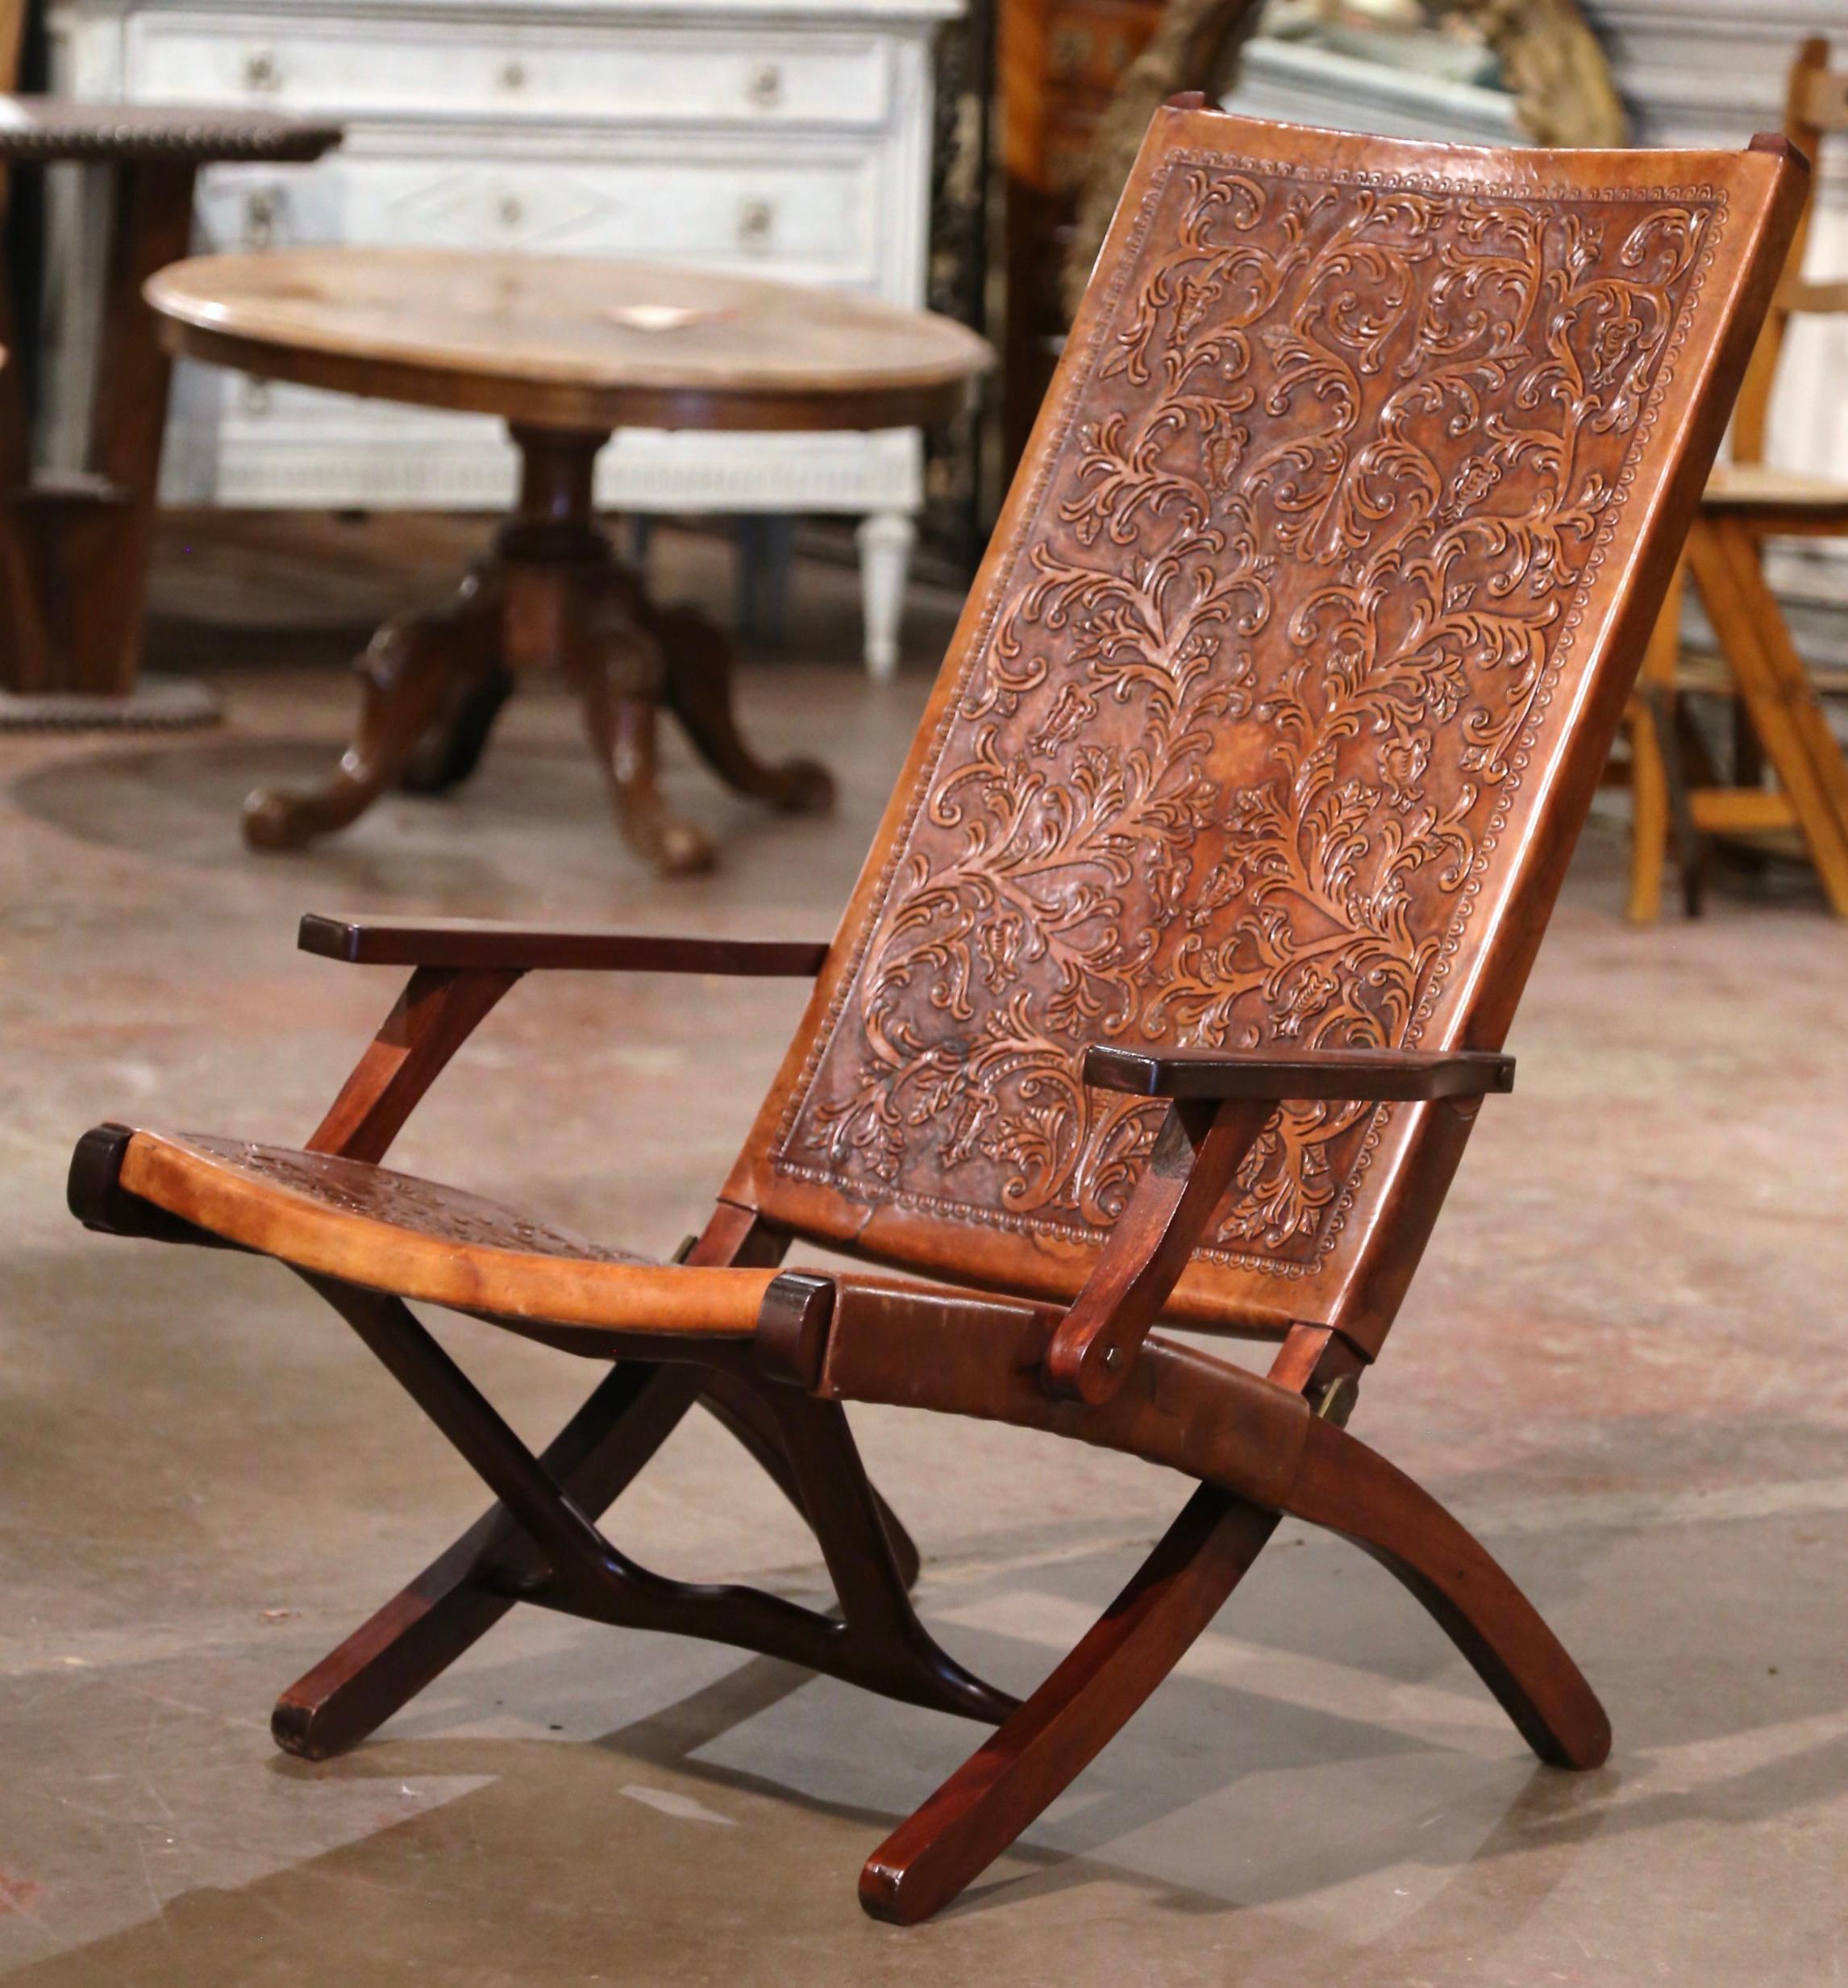 This elegant vintage fruitwood side chair was crafted in Spain, circa 1960. The versatile, folding walnut chair has a simple shape and features its original tooled brown leather seat coverings. The chair is embellished with decorative embossed